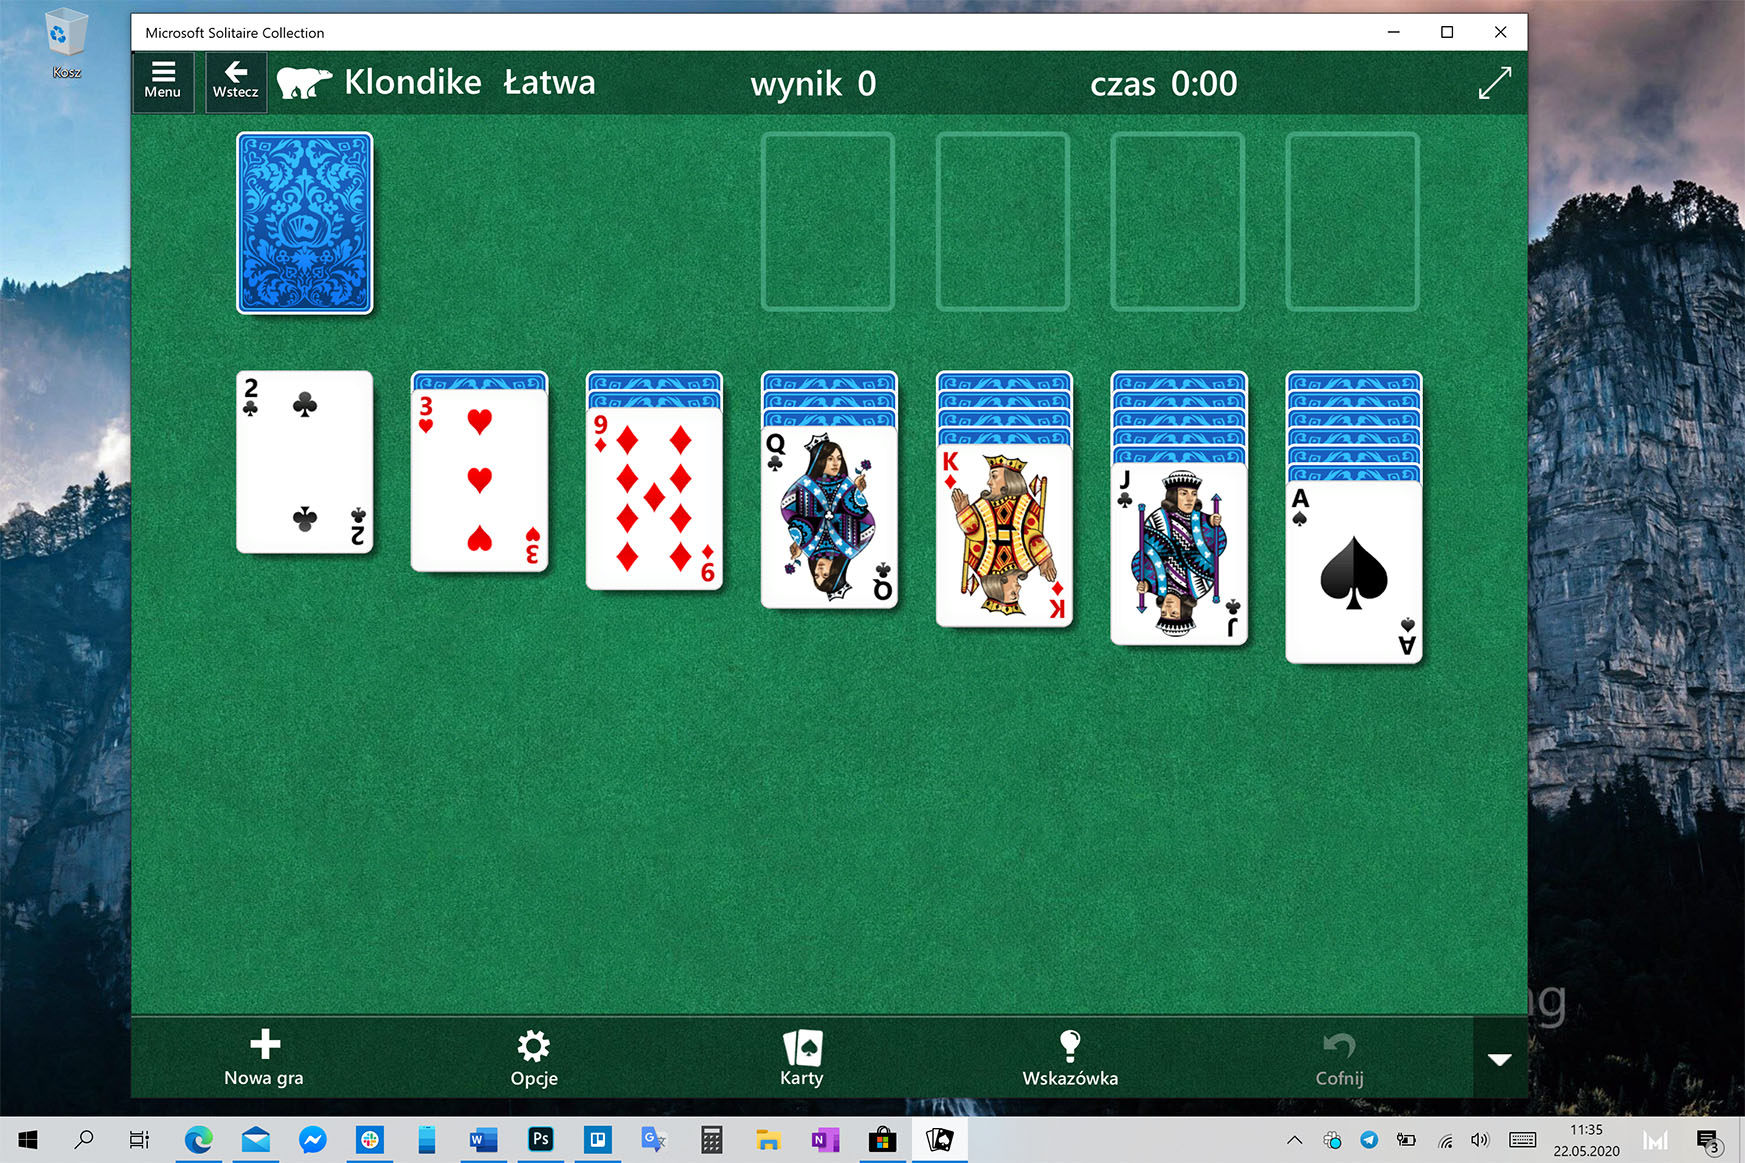 free for ios download Solitaire - Casual Collection